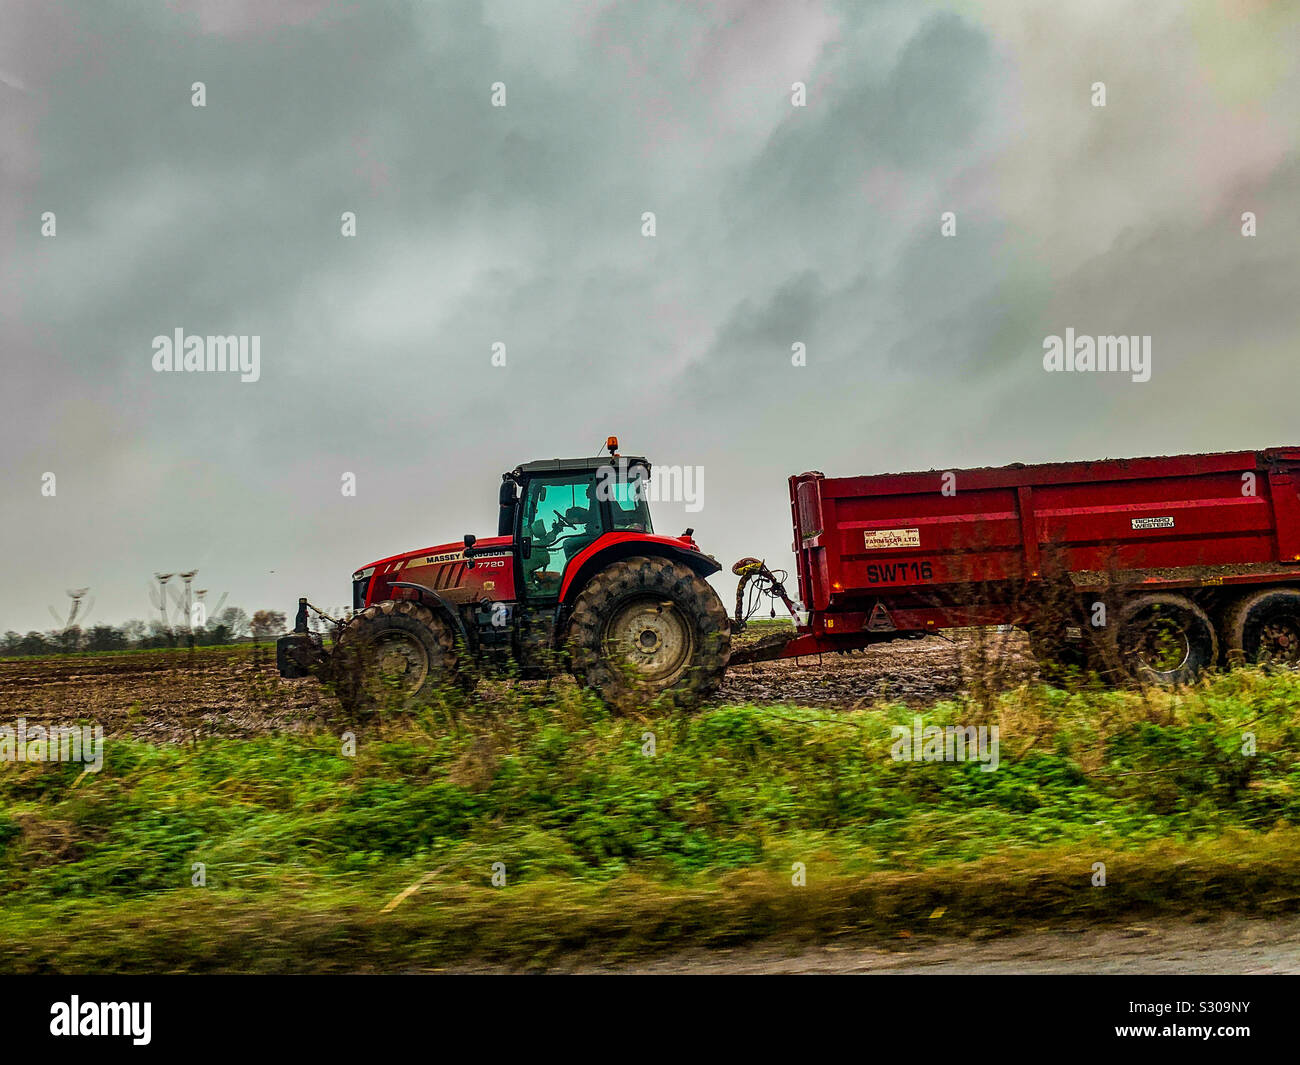 Red Massey Ferguson tractor in a muddy field Stock Photo